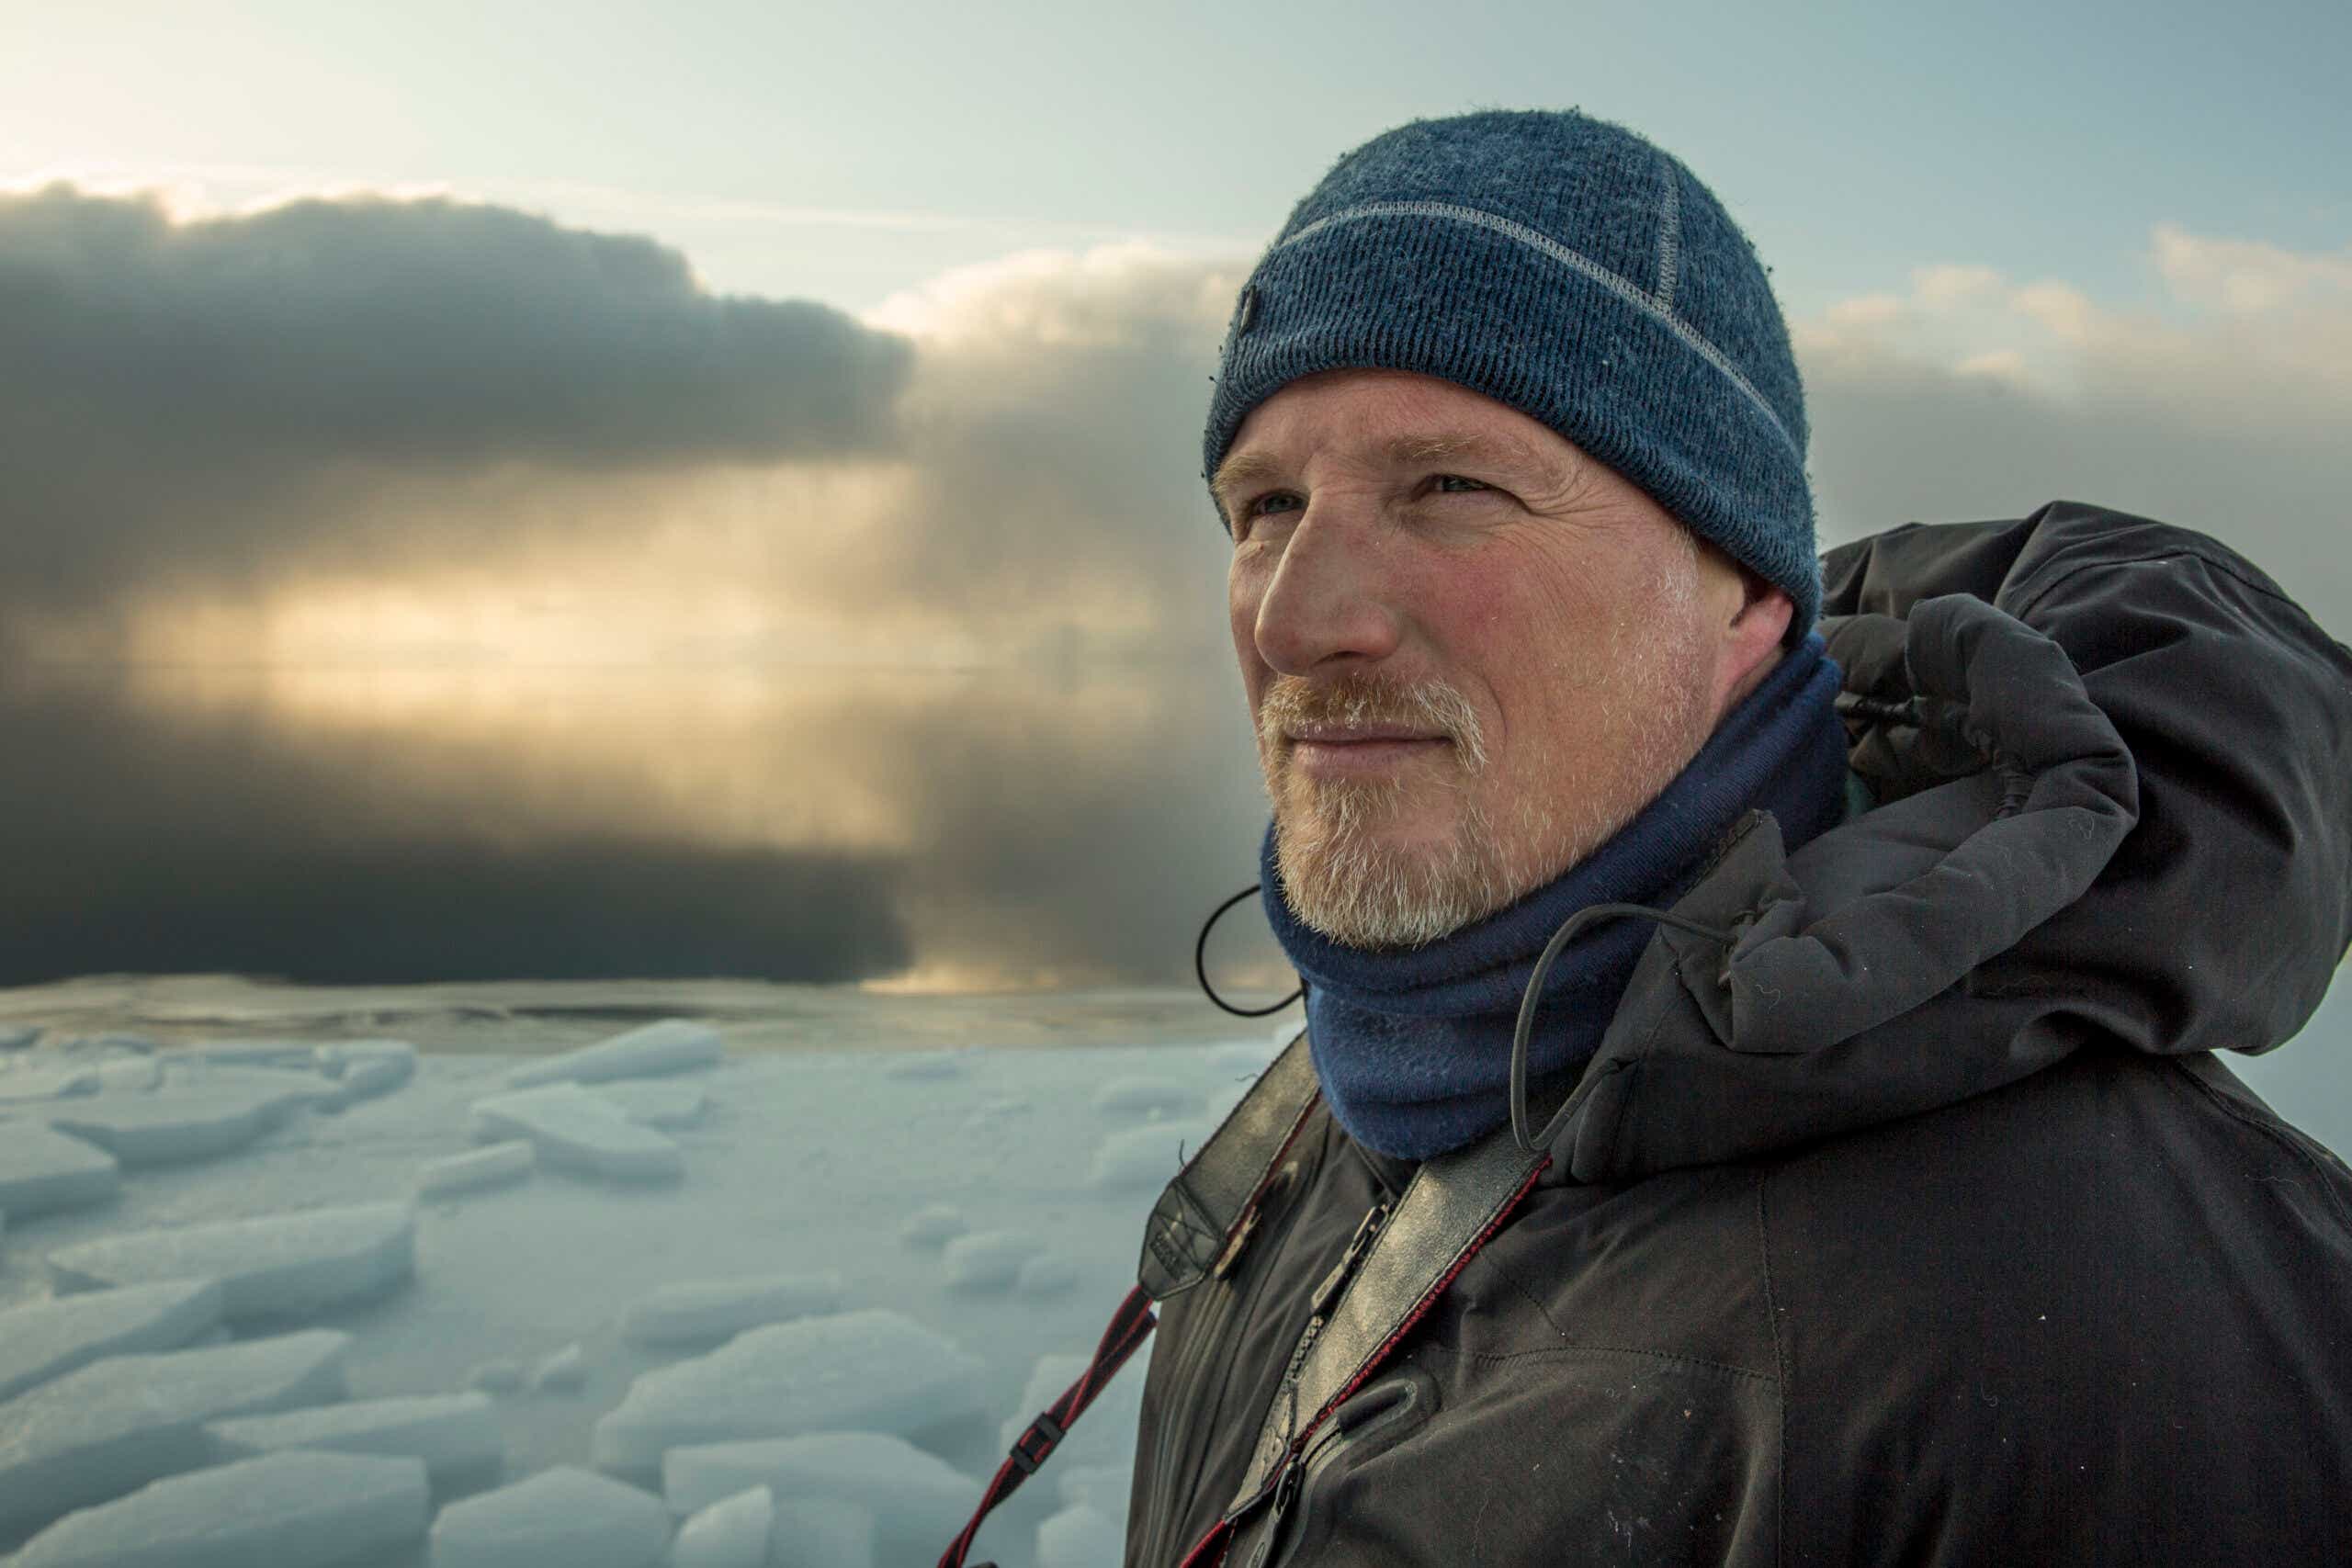 Photographer Paul Nicklen on the edge of the sea ice, Greenland